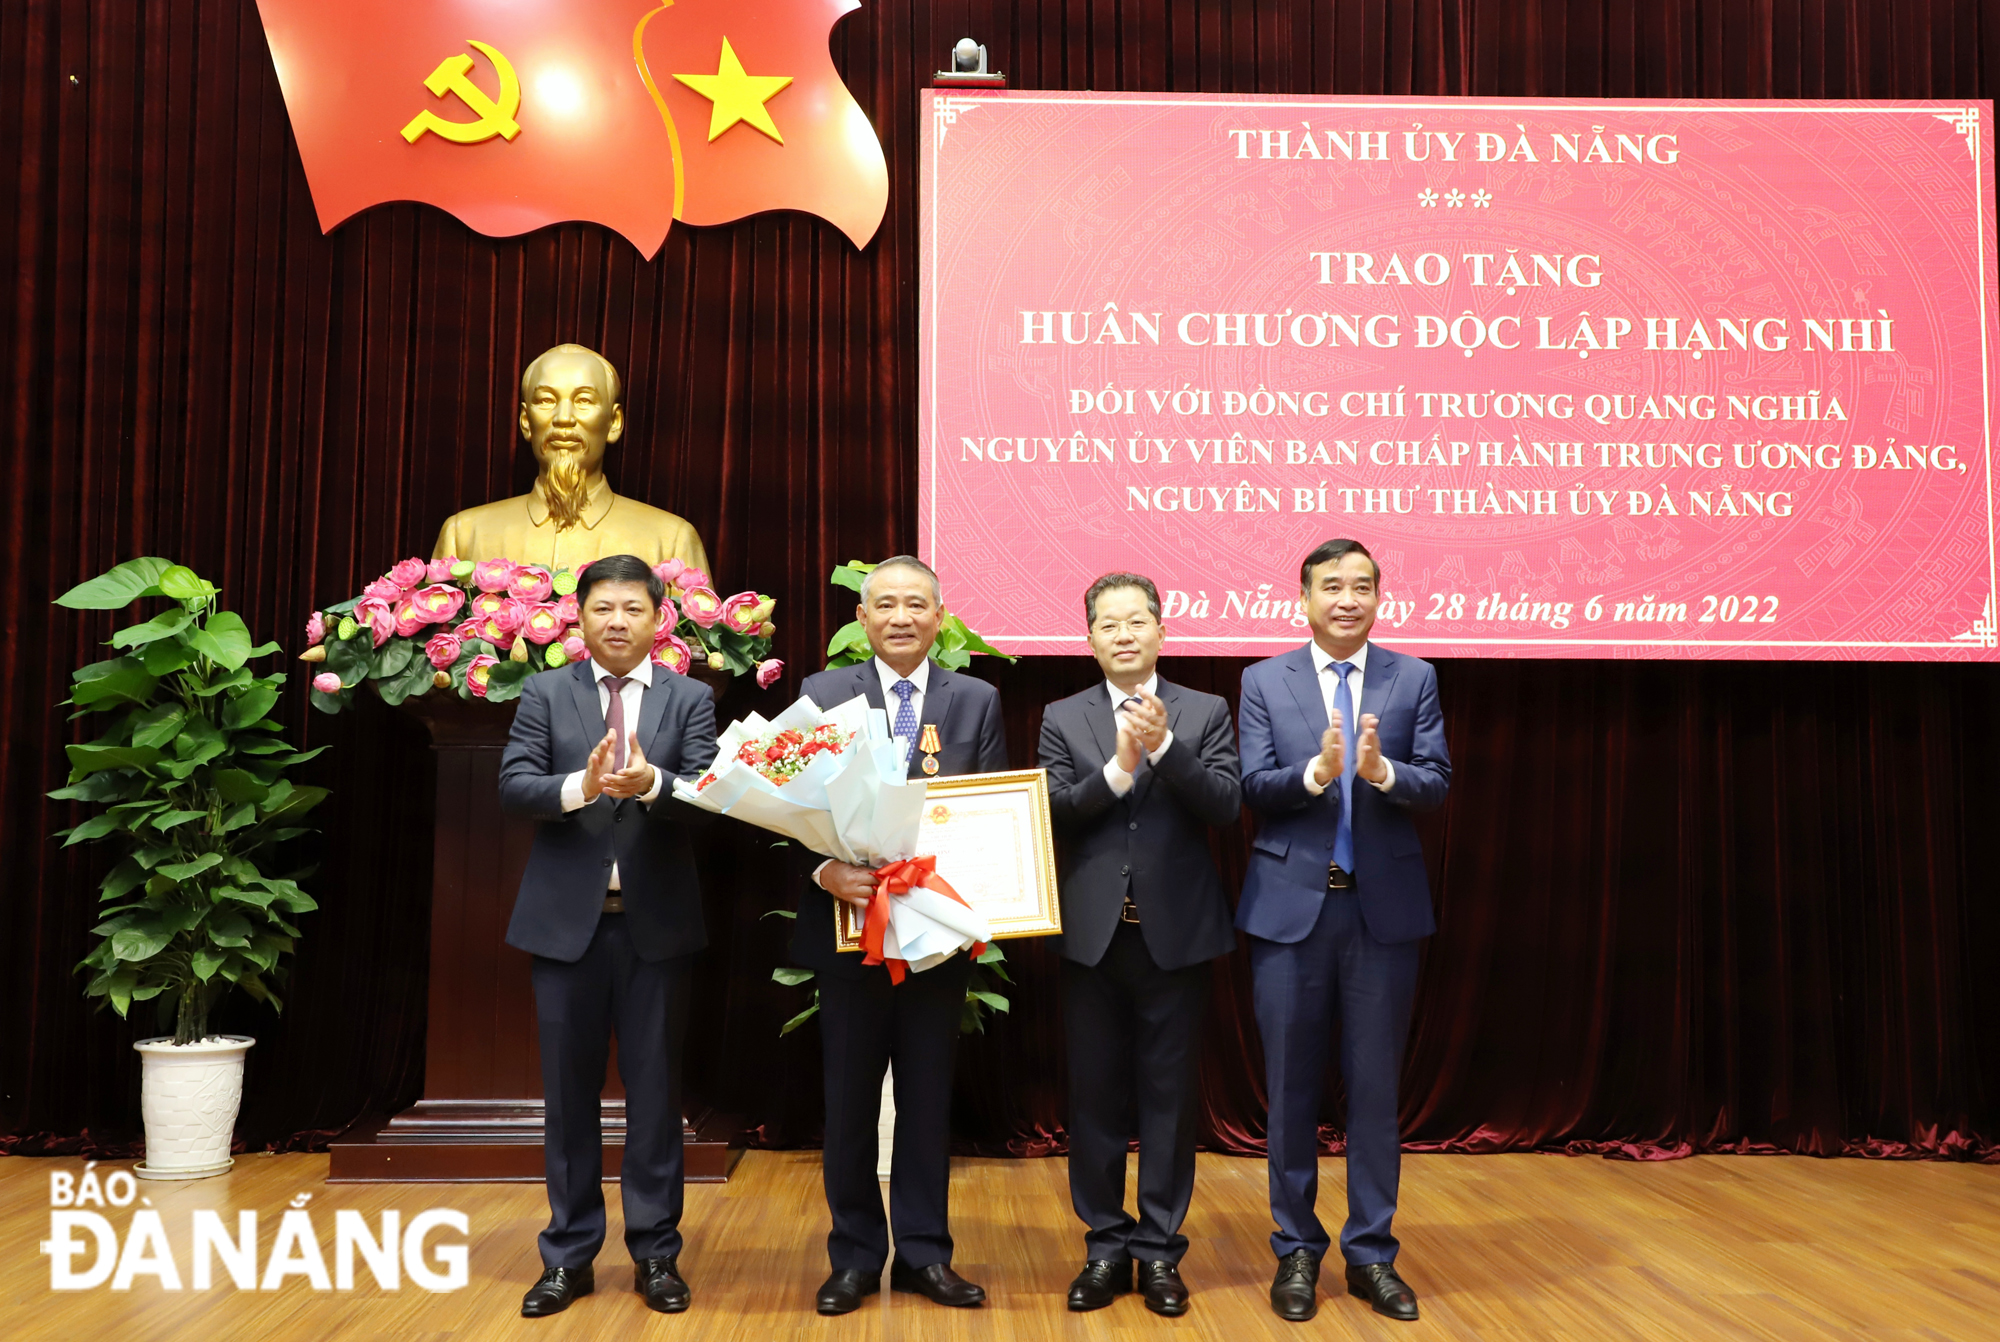 Secretary Nguyen Van Quang (second right), People's Council Chairman Luong Nguyen Minh Triet (first left) and People's Committee Chairman Le Trung Chinh (first right) presenting flowers to congratulate the former Secretary Party Committee Truong Quang Nghia. Photo: NGOC PHU